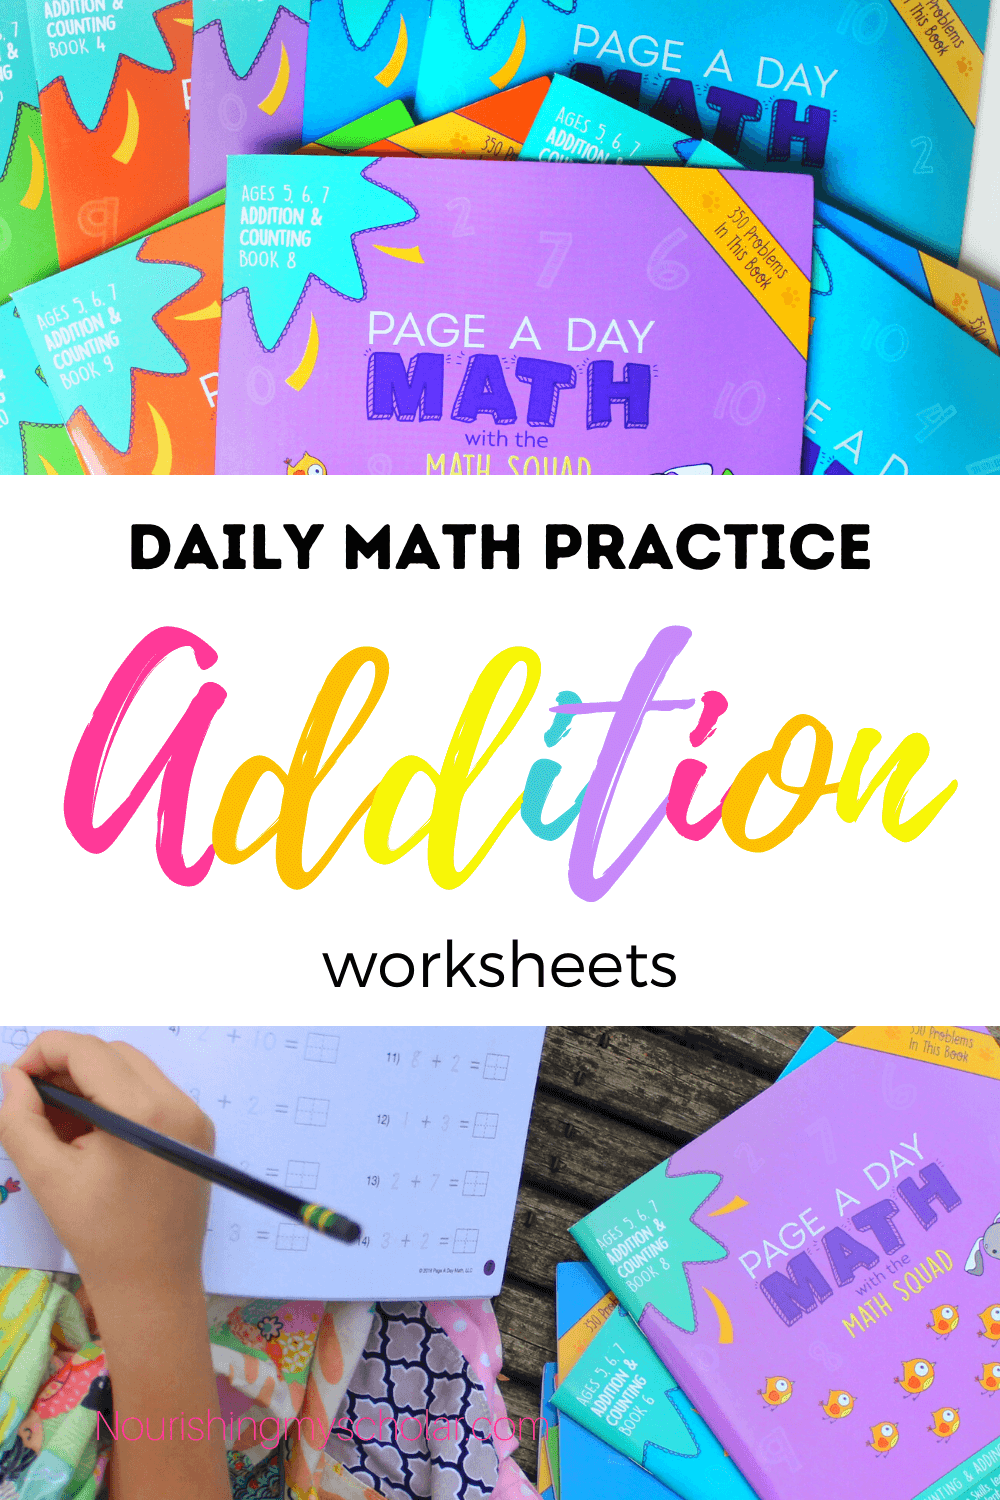 Daily Math Practice Addition Worksheets: Do you need addition math worksheets for your kindergartner or first grader? Maybe your kiddo needs a little extra help with their math confidence. These Page A Day Math booklets are perfect for kids needing daily math practice while building math fluency! #kindergartenmath #kindergarten #math #addition #firstgrade #mathworksheets #mathpractice #kindergartenadditionworksheets #additionforkindergarten #1stgradeaddition #firstgradeaddition #homeschool 